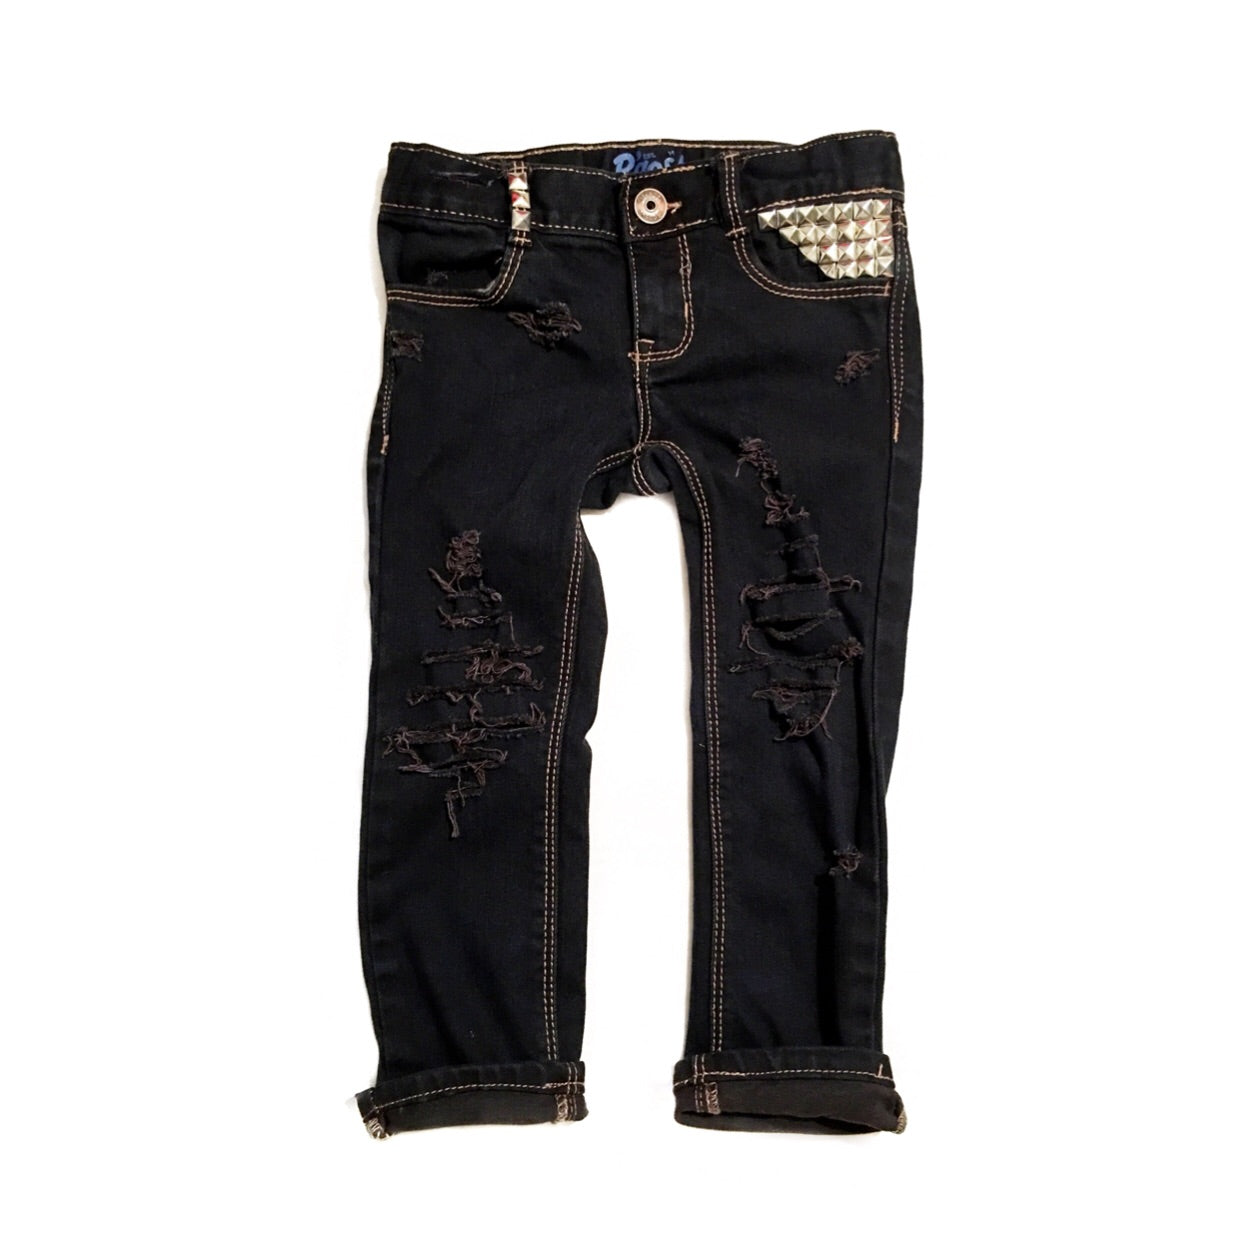 Midnight Black Distressed, Dyed, and Studded Skinny Jeans